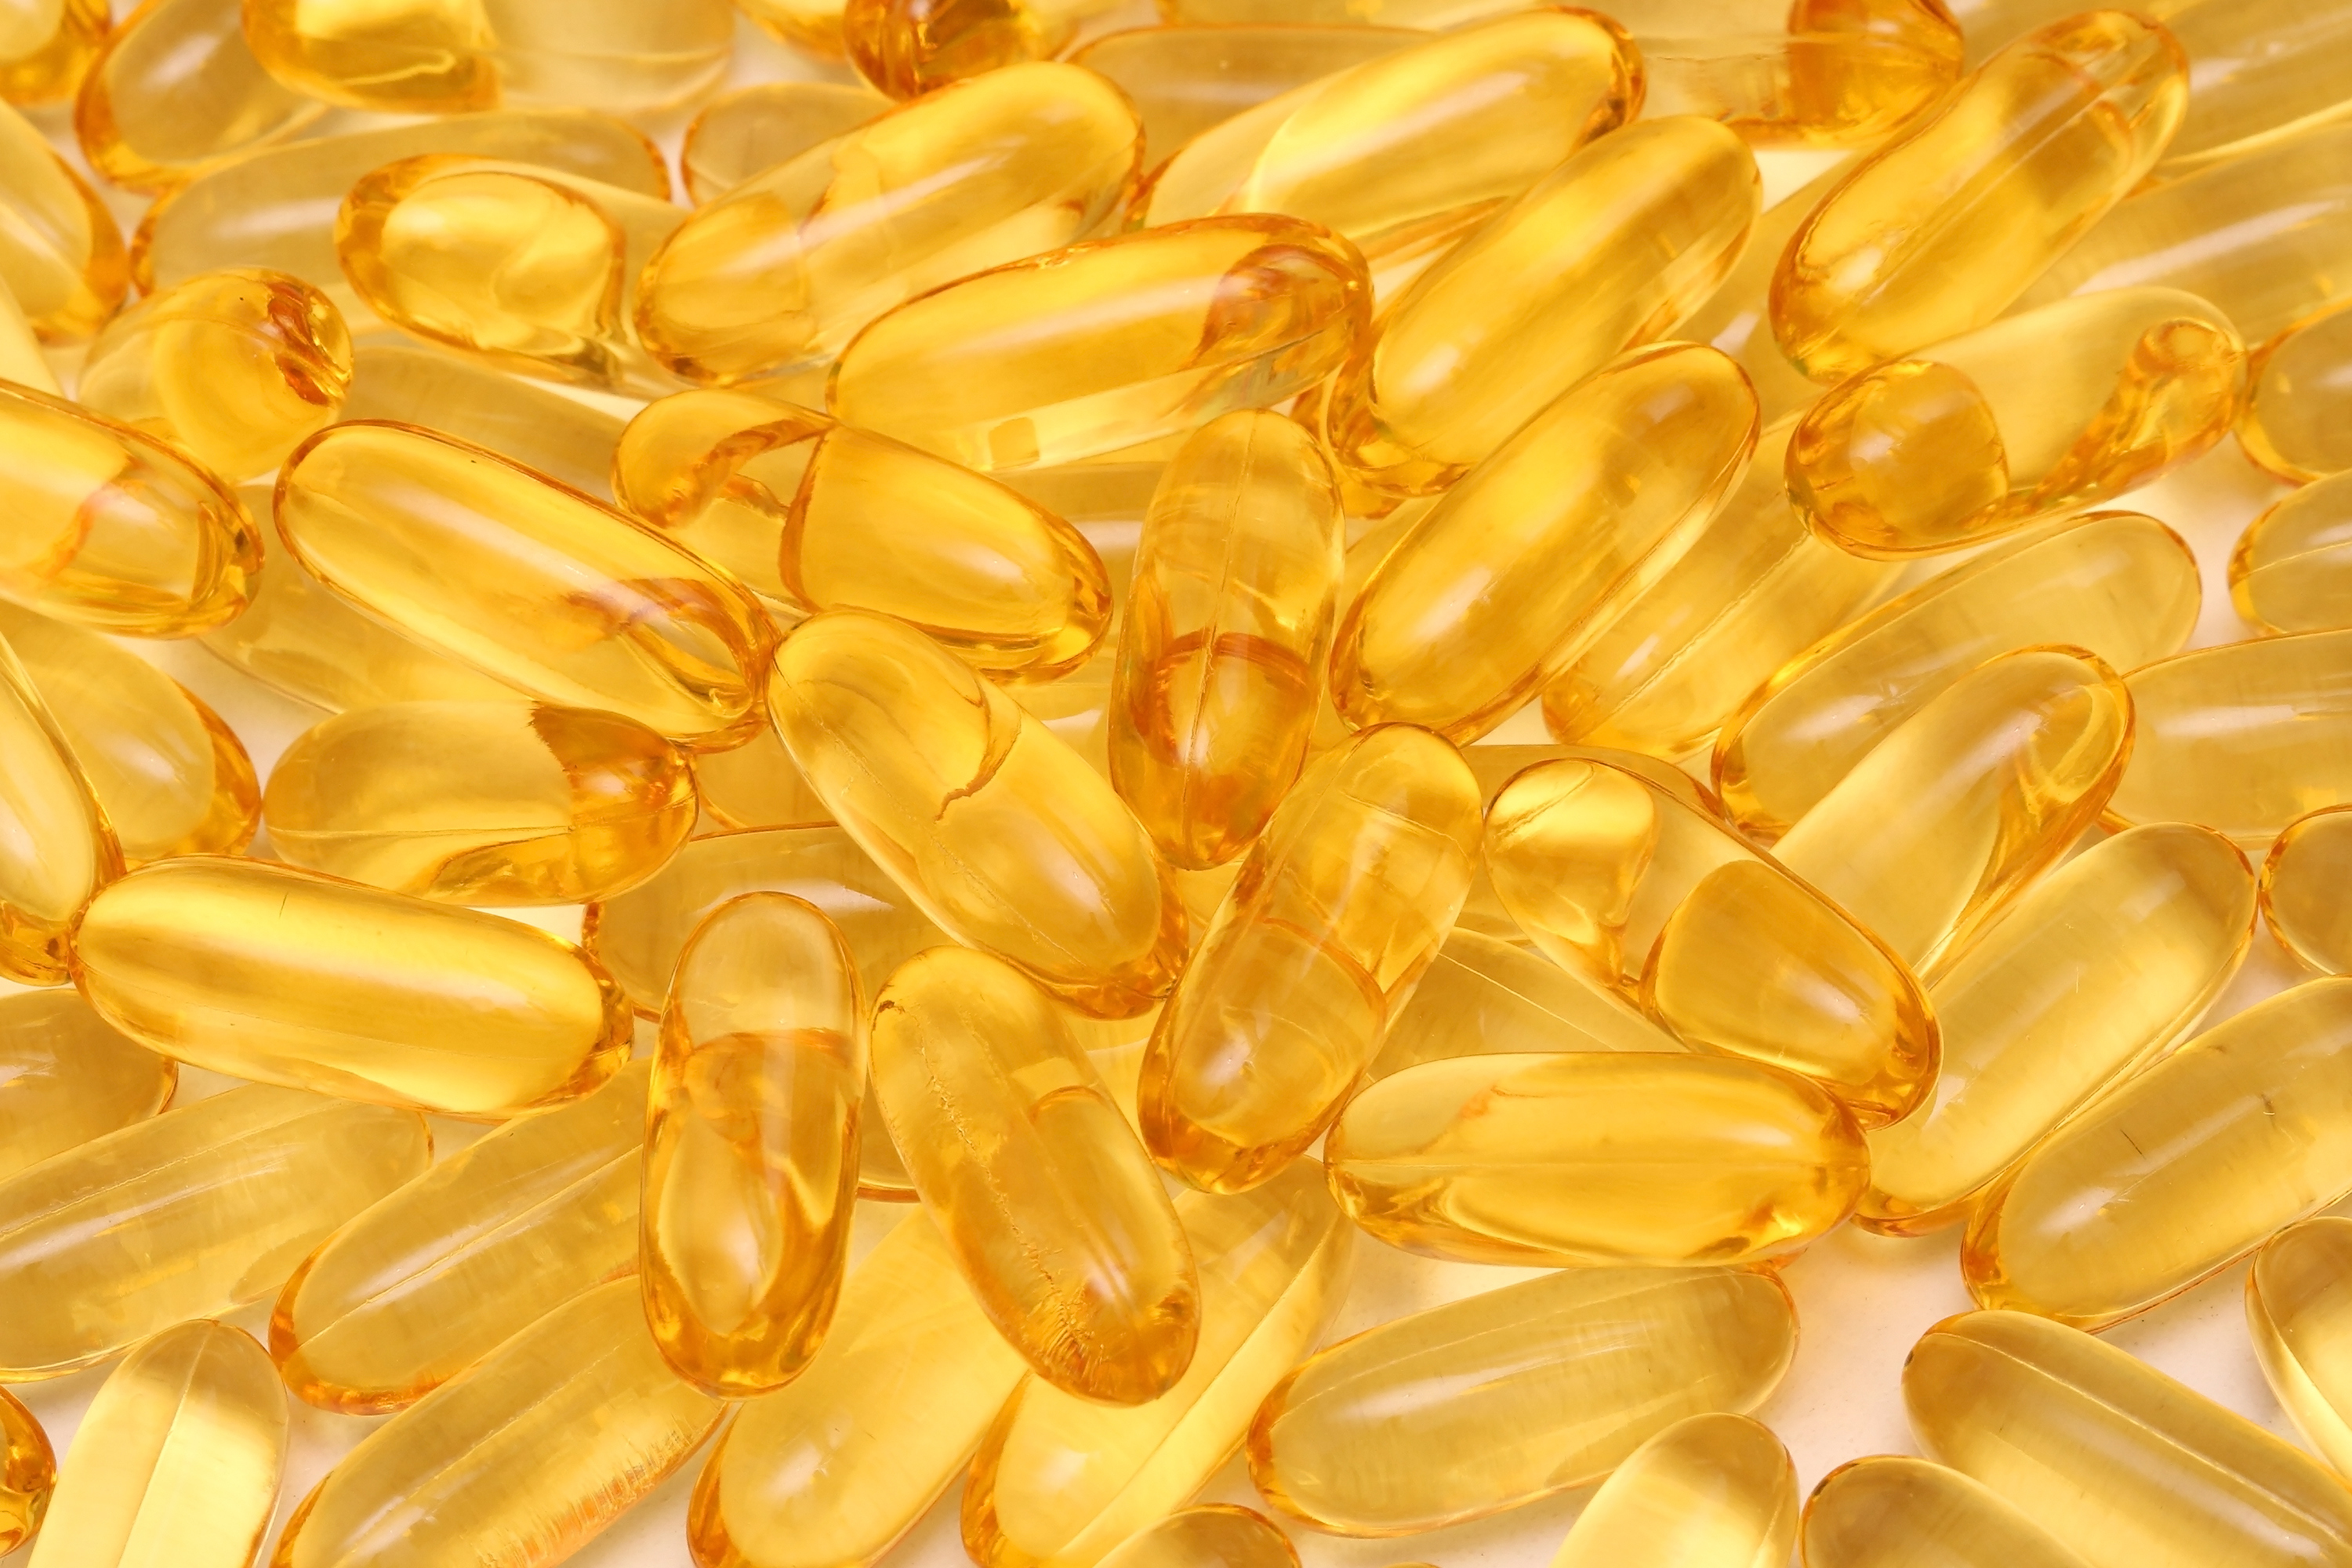 Large pile of omega 3 fish oil supplement gel capsules